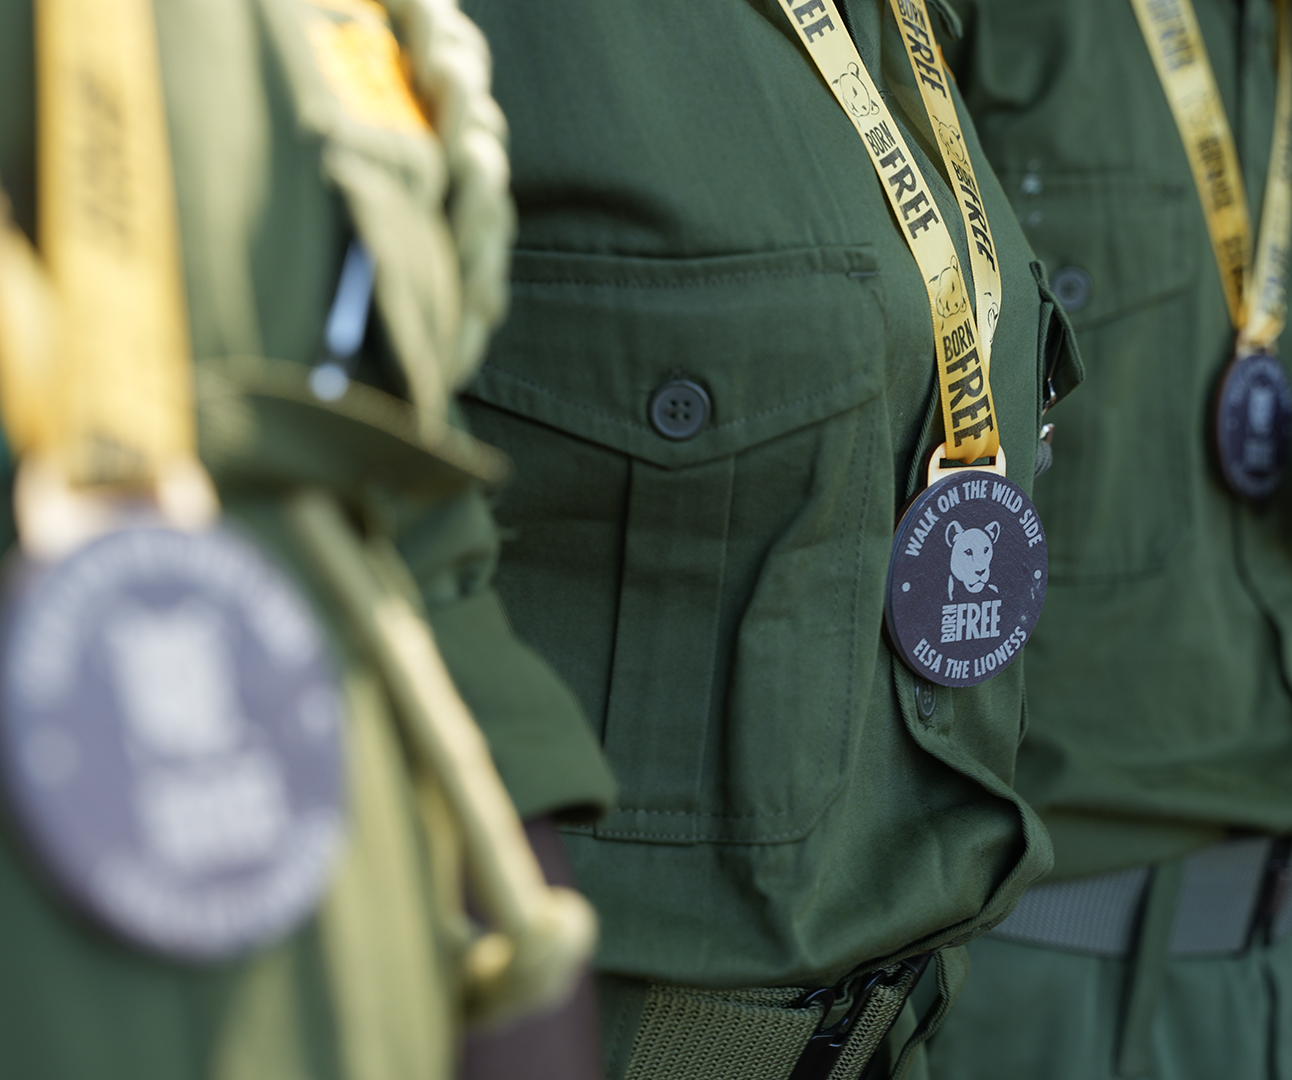 Close up of the chests of three people in green uniforms, with Walk on the Wild Side medals hanging around their necks